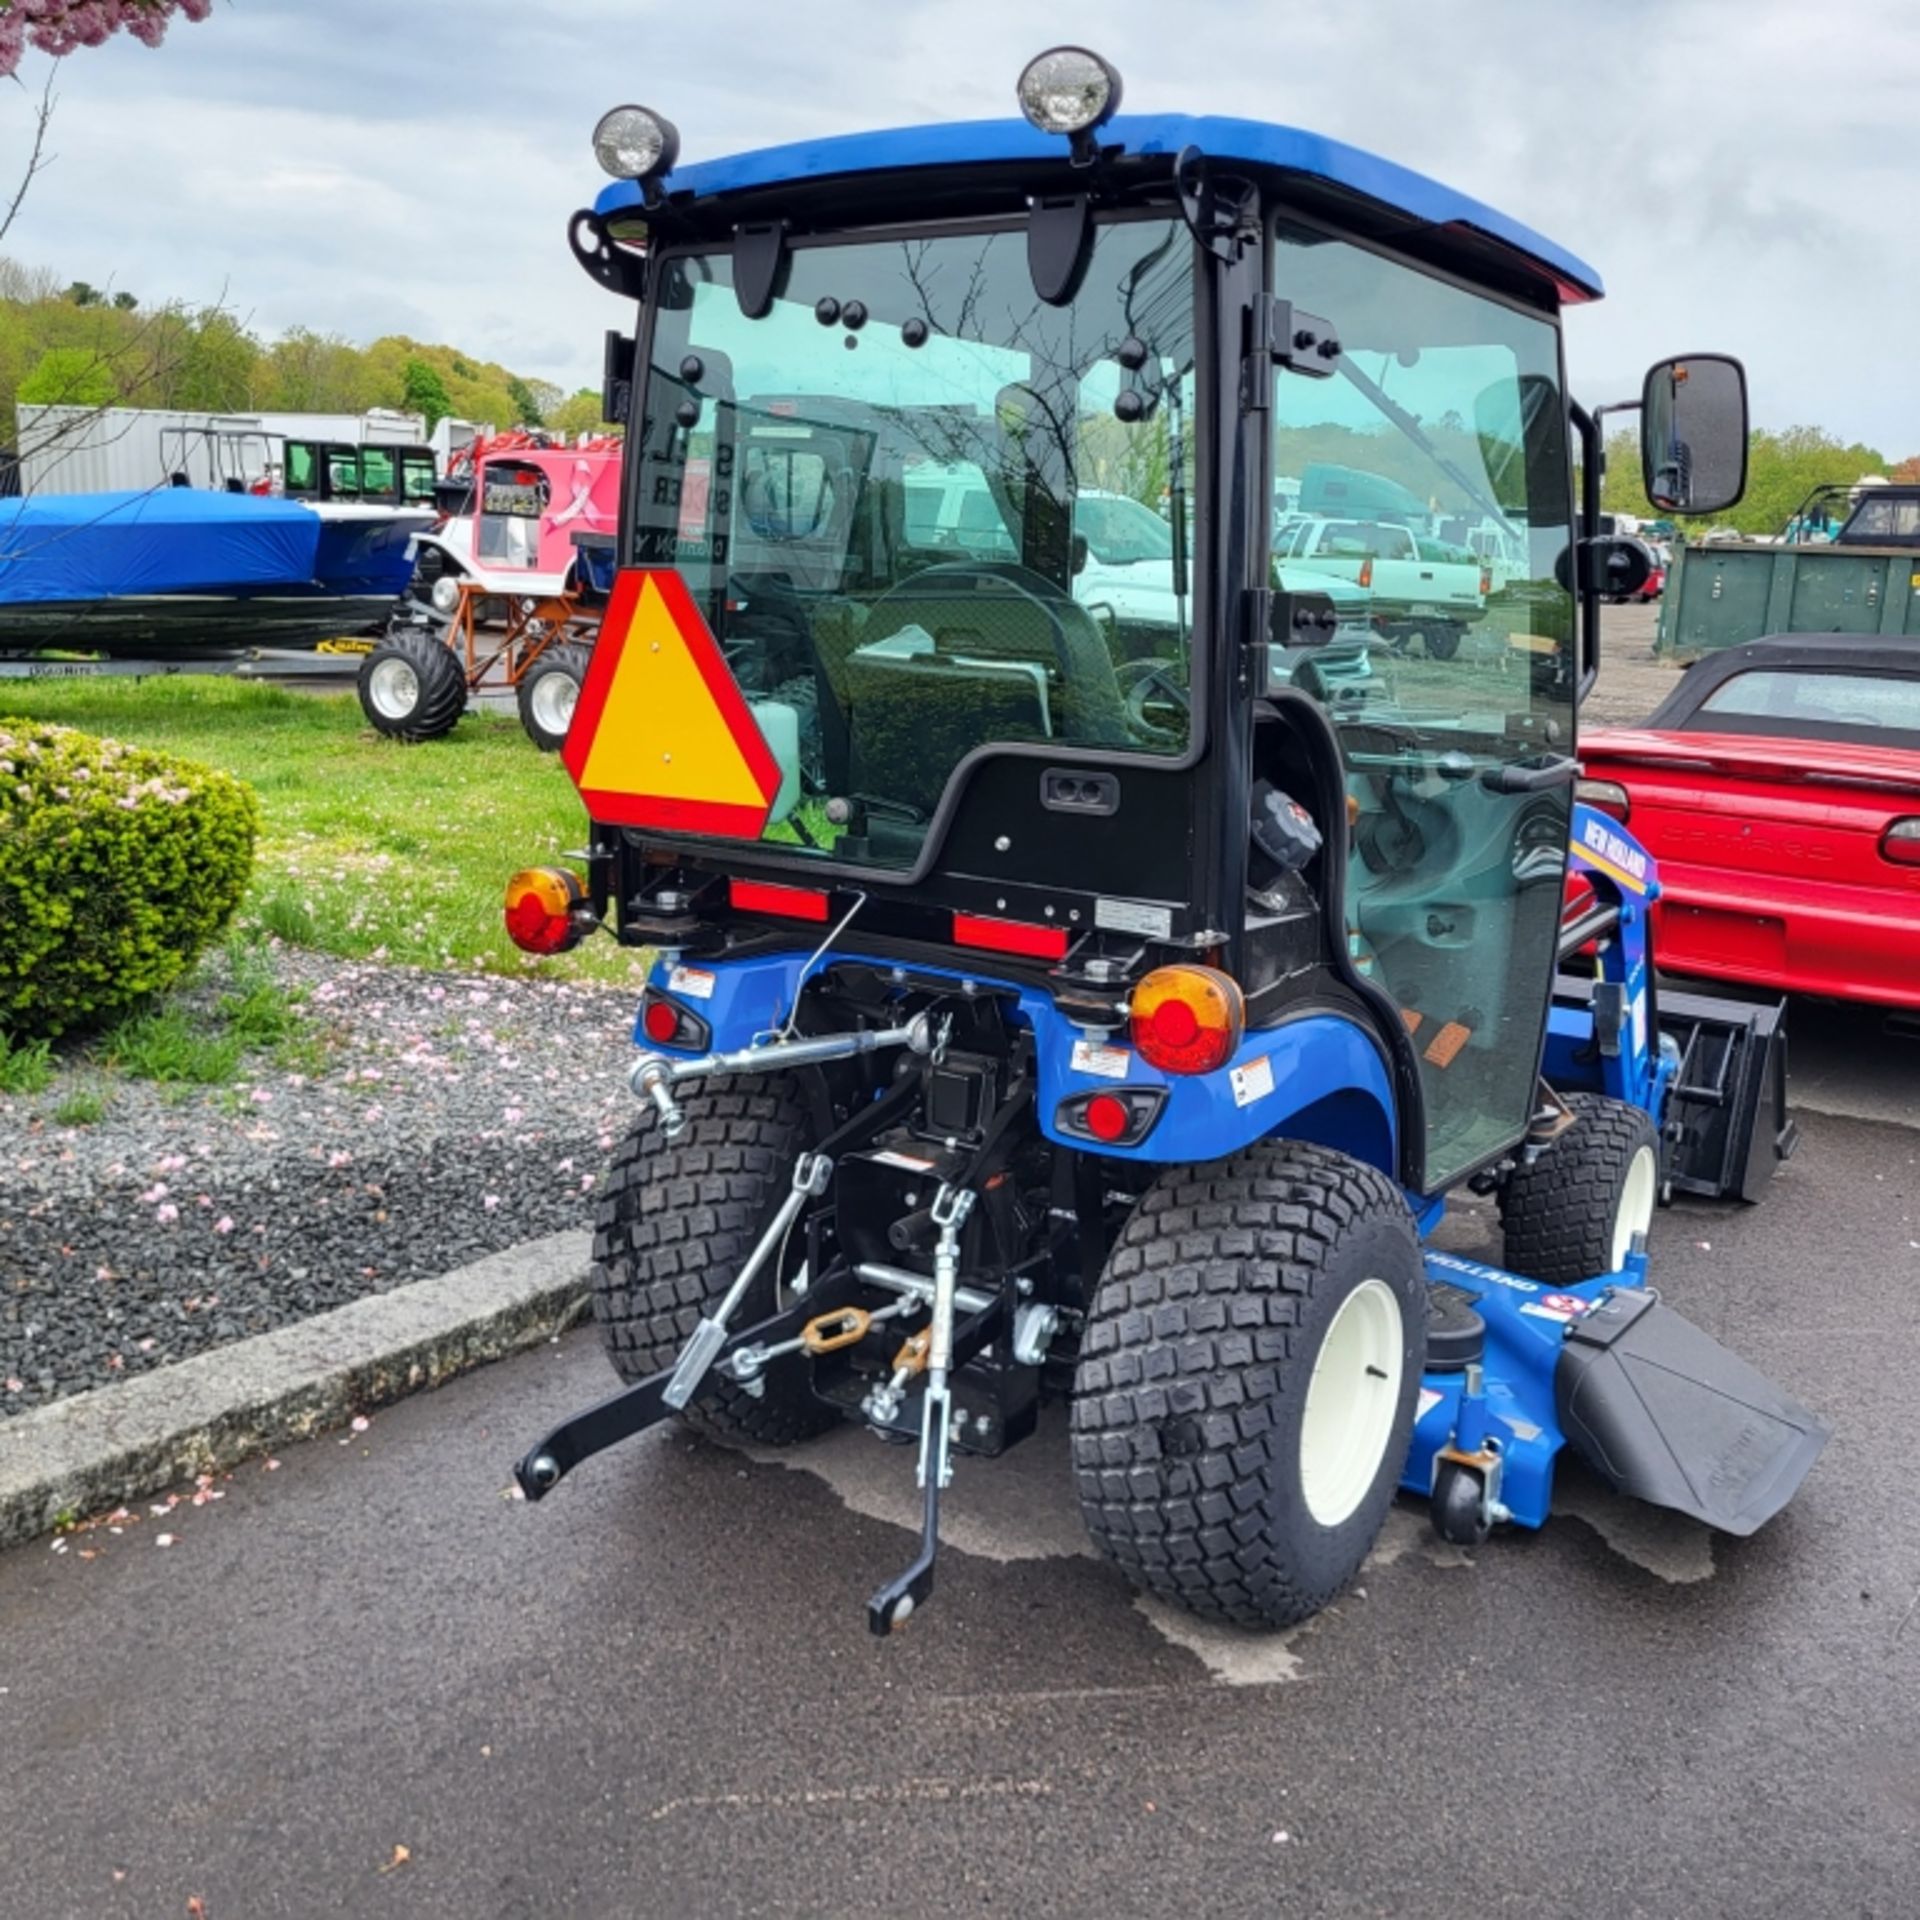 New Holland Workmaster 25s Tractor - Image 2 of 8